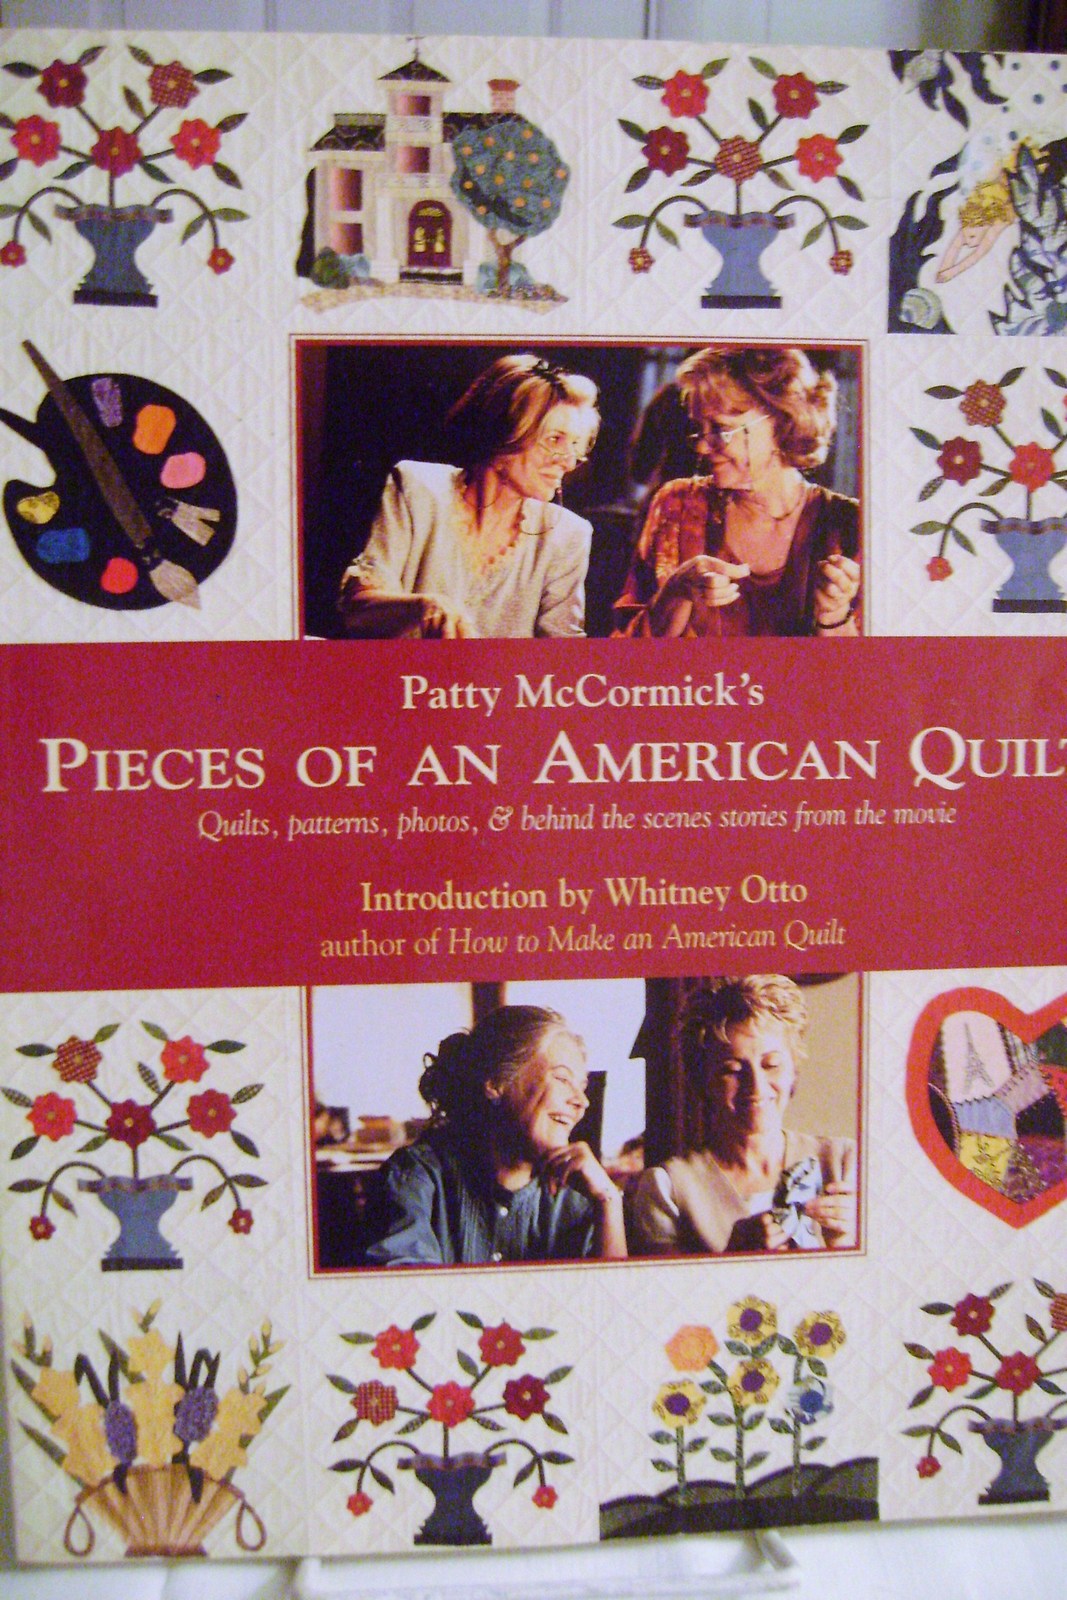 Patty McCormick's Pieces Of An American Quilt Patterns, Quilts, Photos Plus More - $10.00